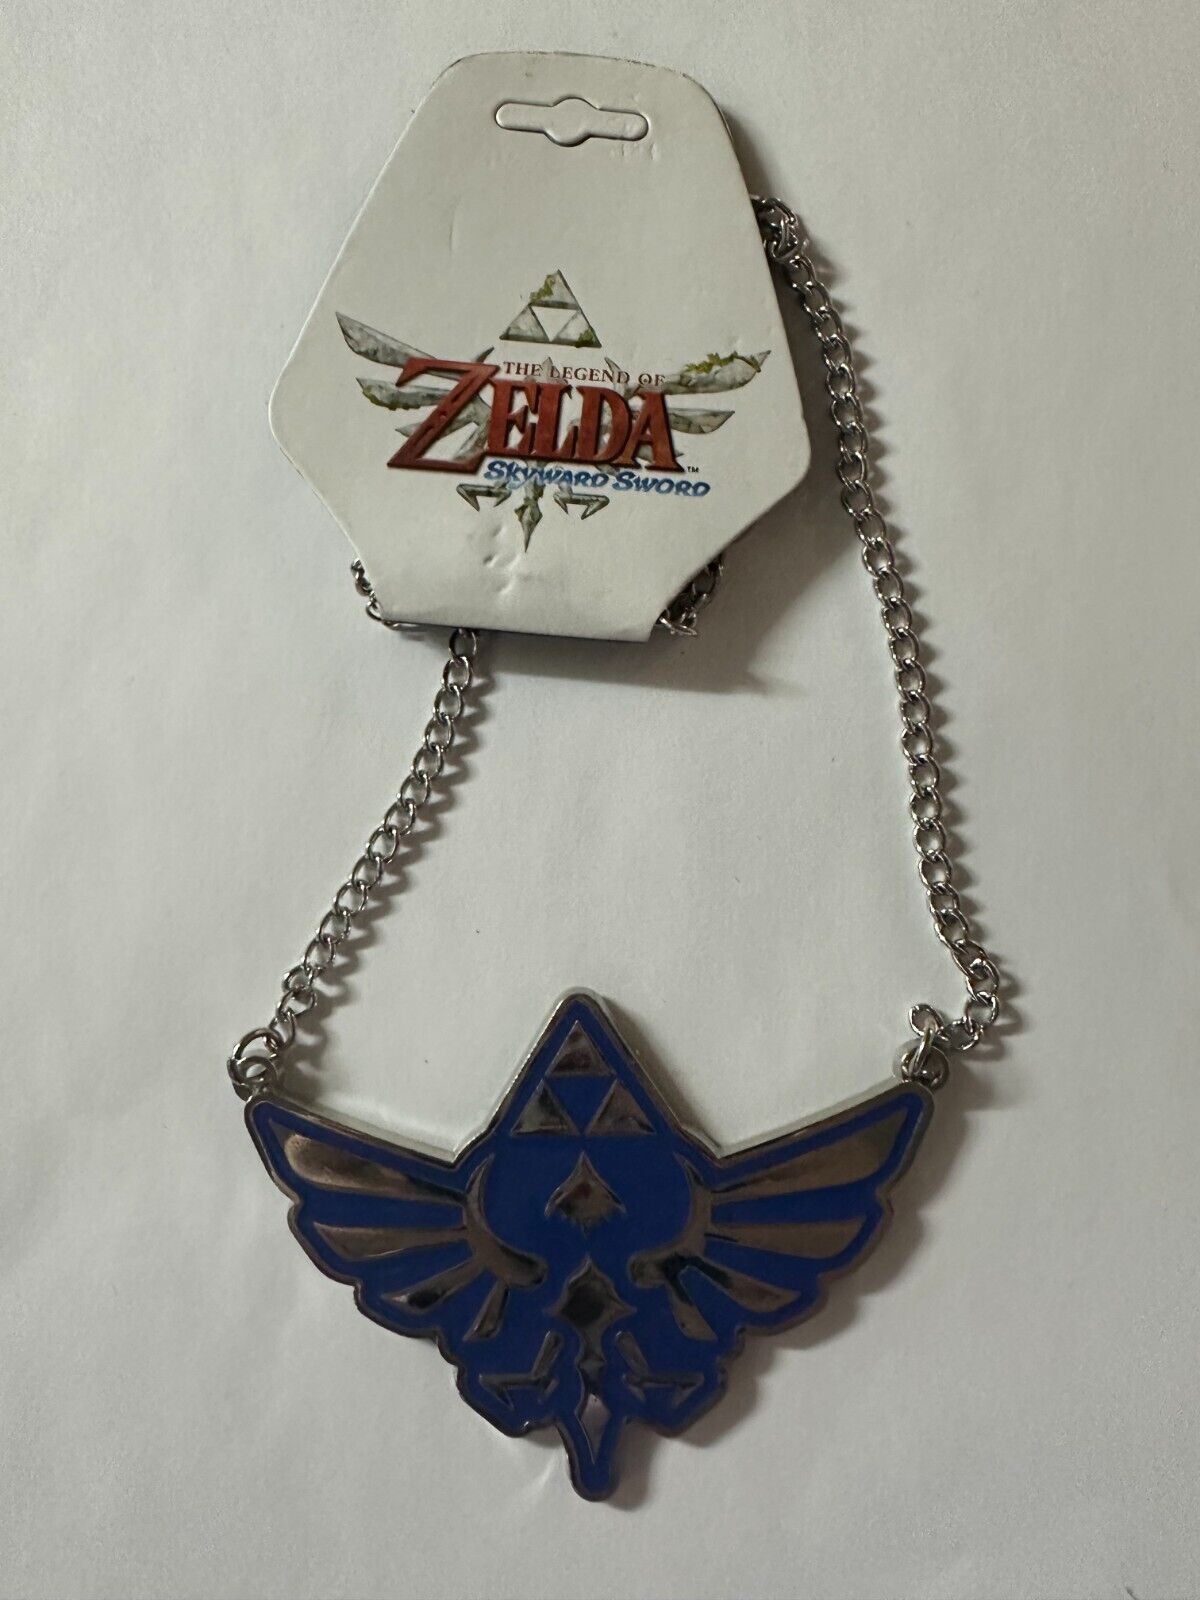 (LUP) Zelda Blue And Silver Symbol Necklace